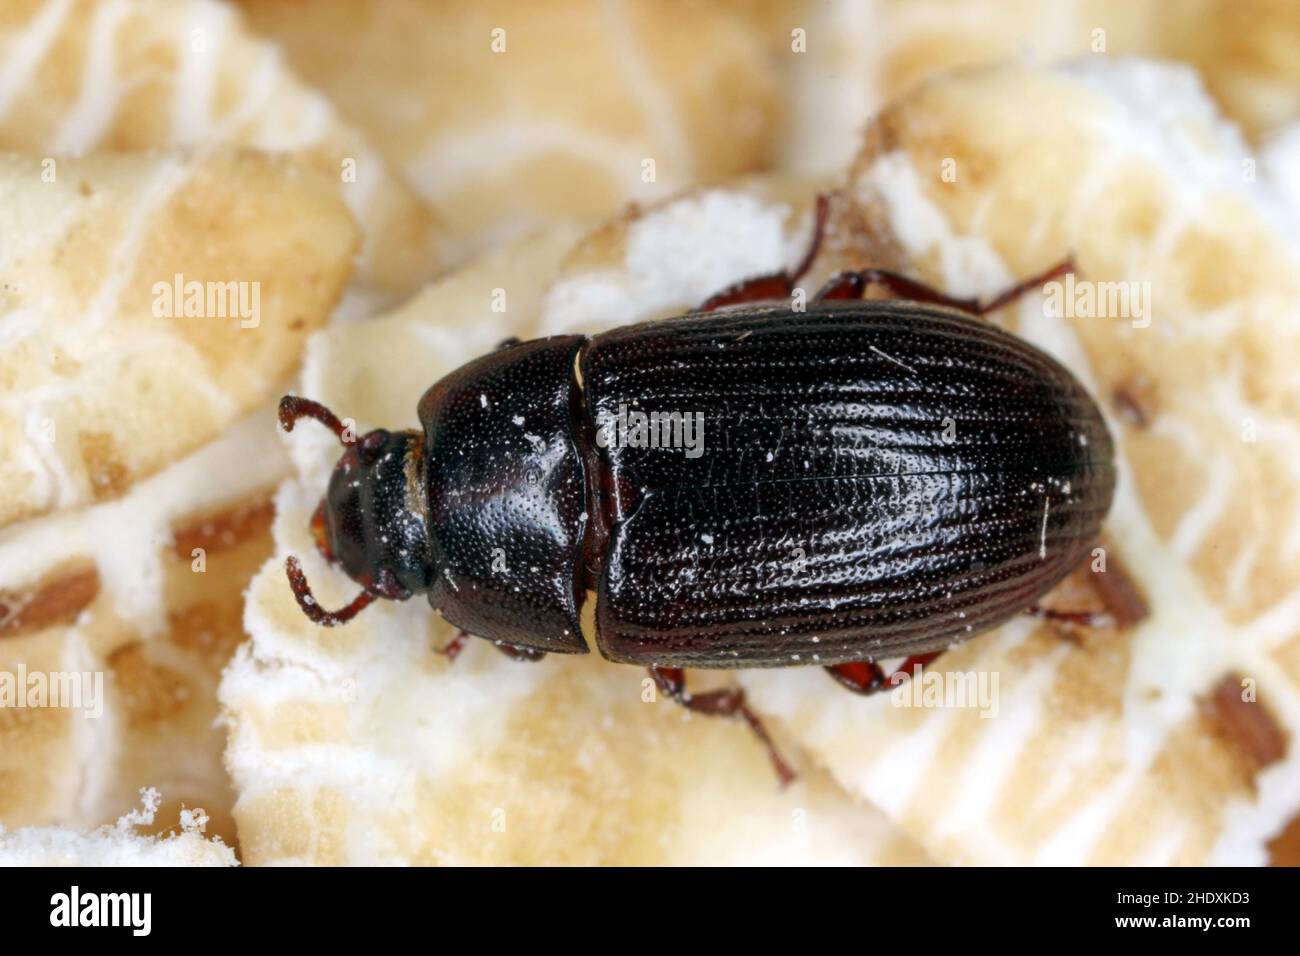 Alphitobius diaperinus is a species of beetle in the family Tenebrionidae, the darkling beetles. Commonly as the lesser mealworm and the litter beetle Stock Photo